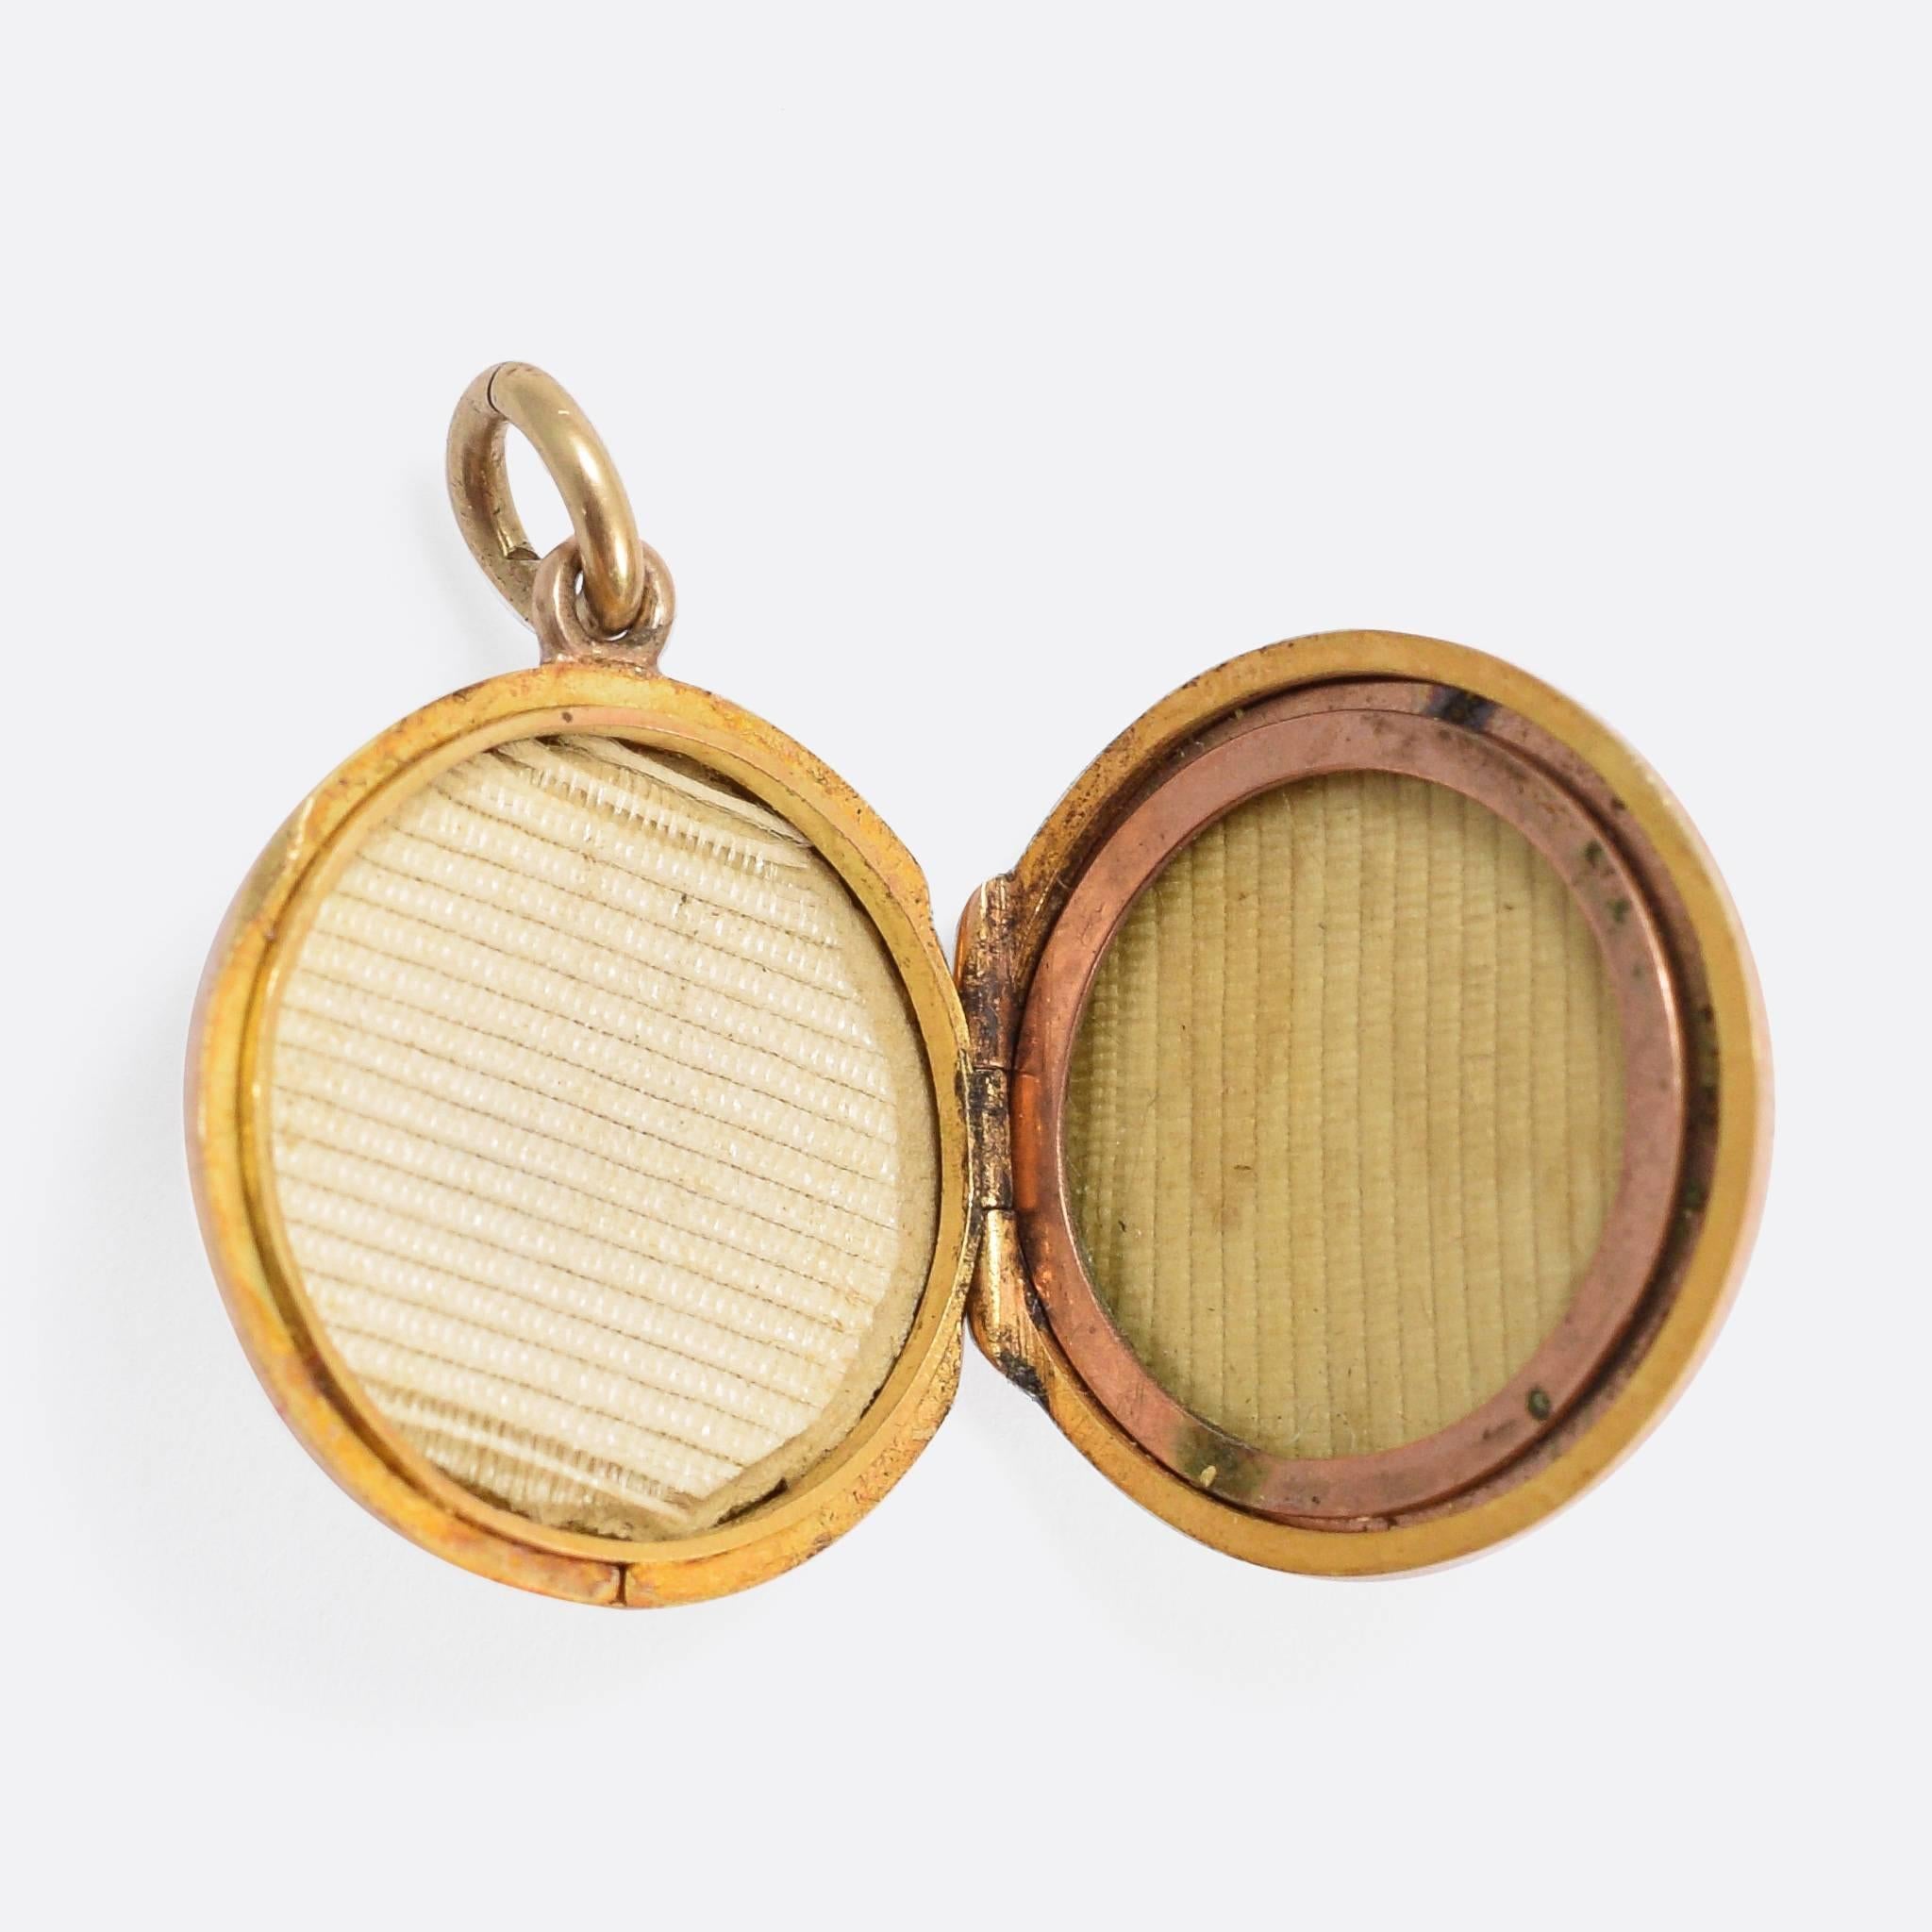 An attractive antique round locket, modelled in 15k gold throughout. The front is set with two old cut diamonds and a vivid blue lab-grown sapphire. The piece opens, hinged on one side, with space inside for a small photo or memento.